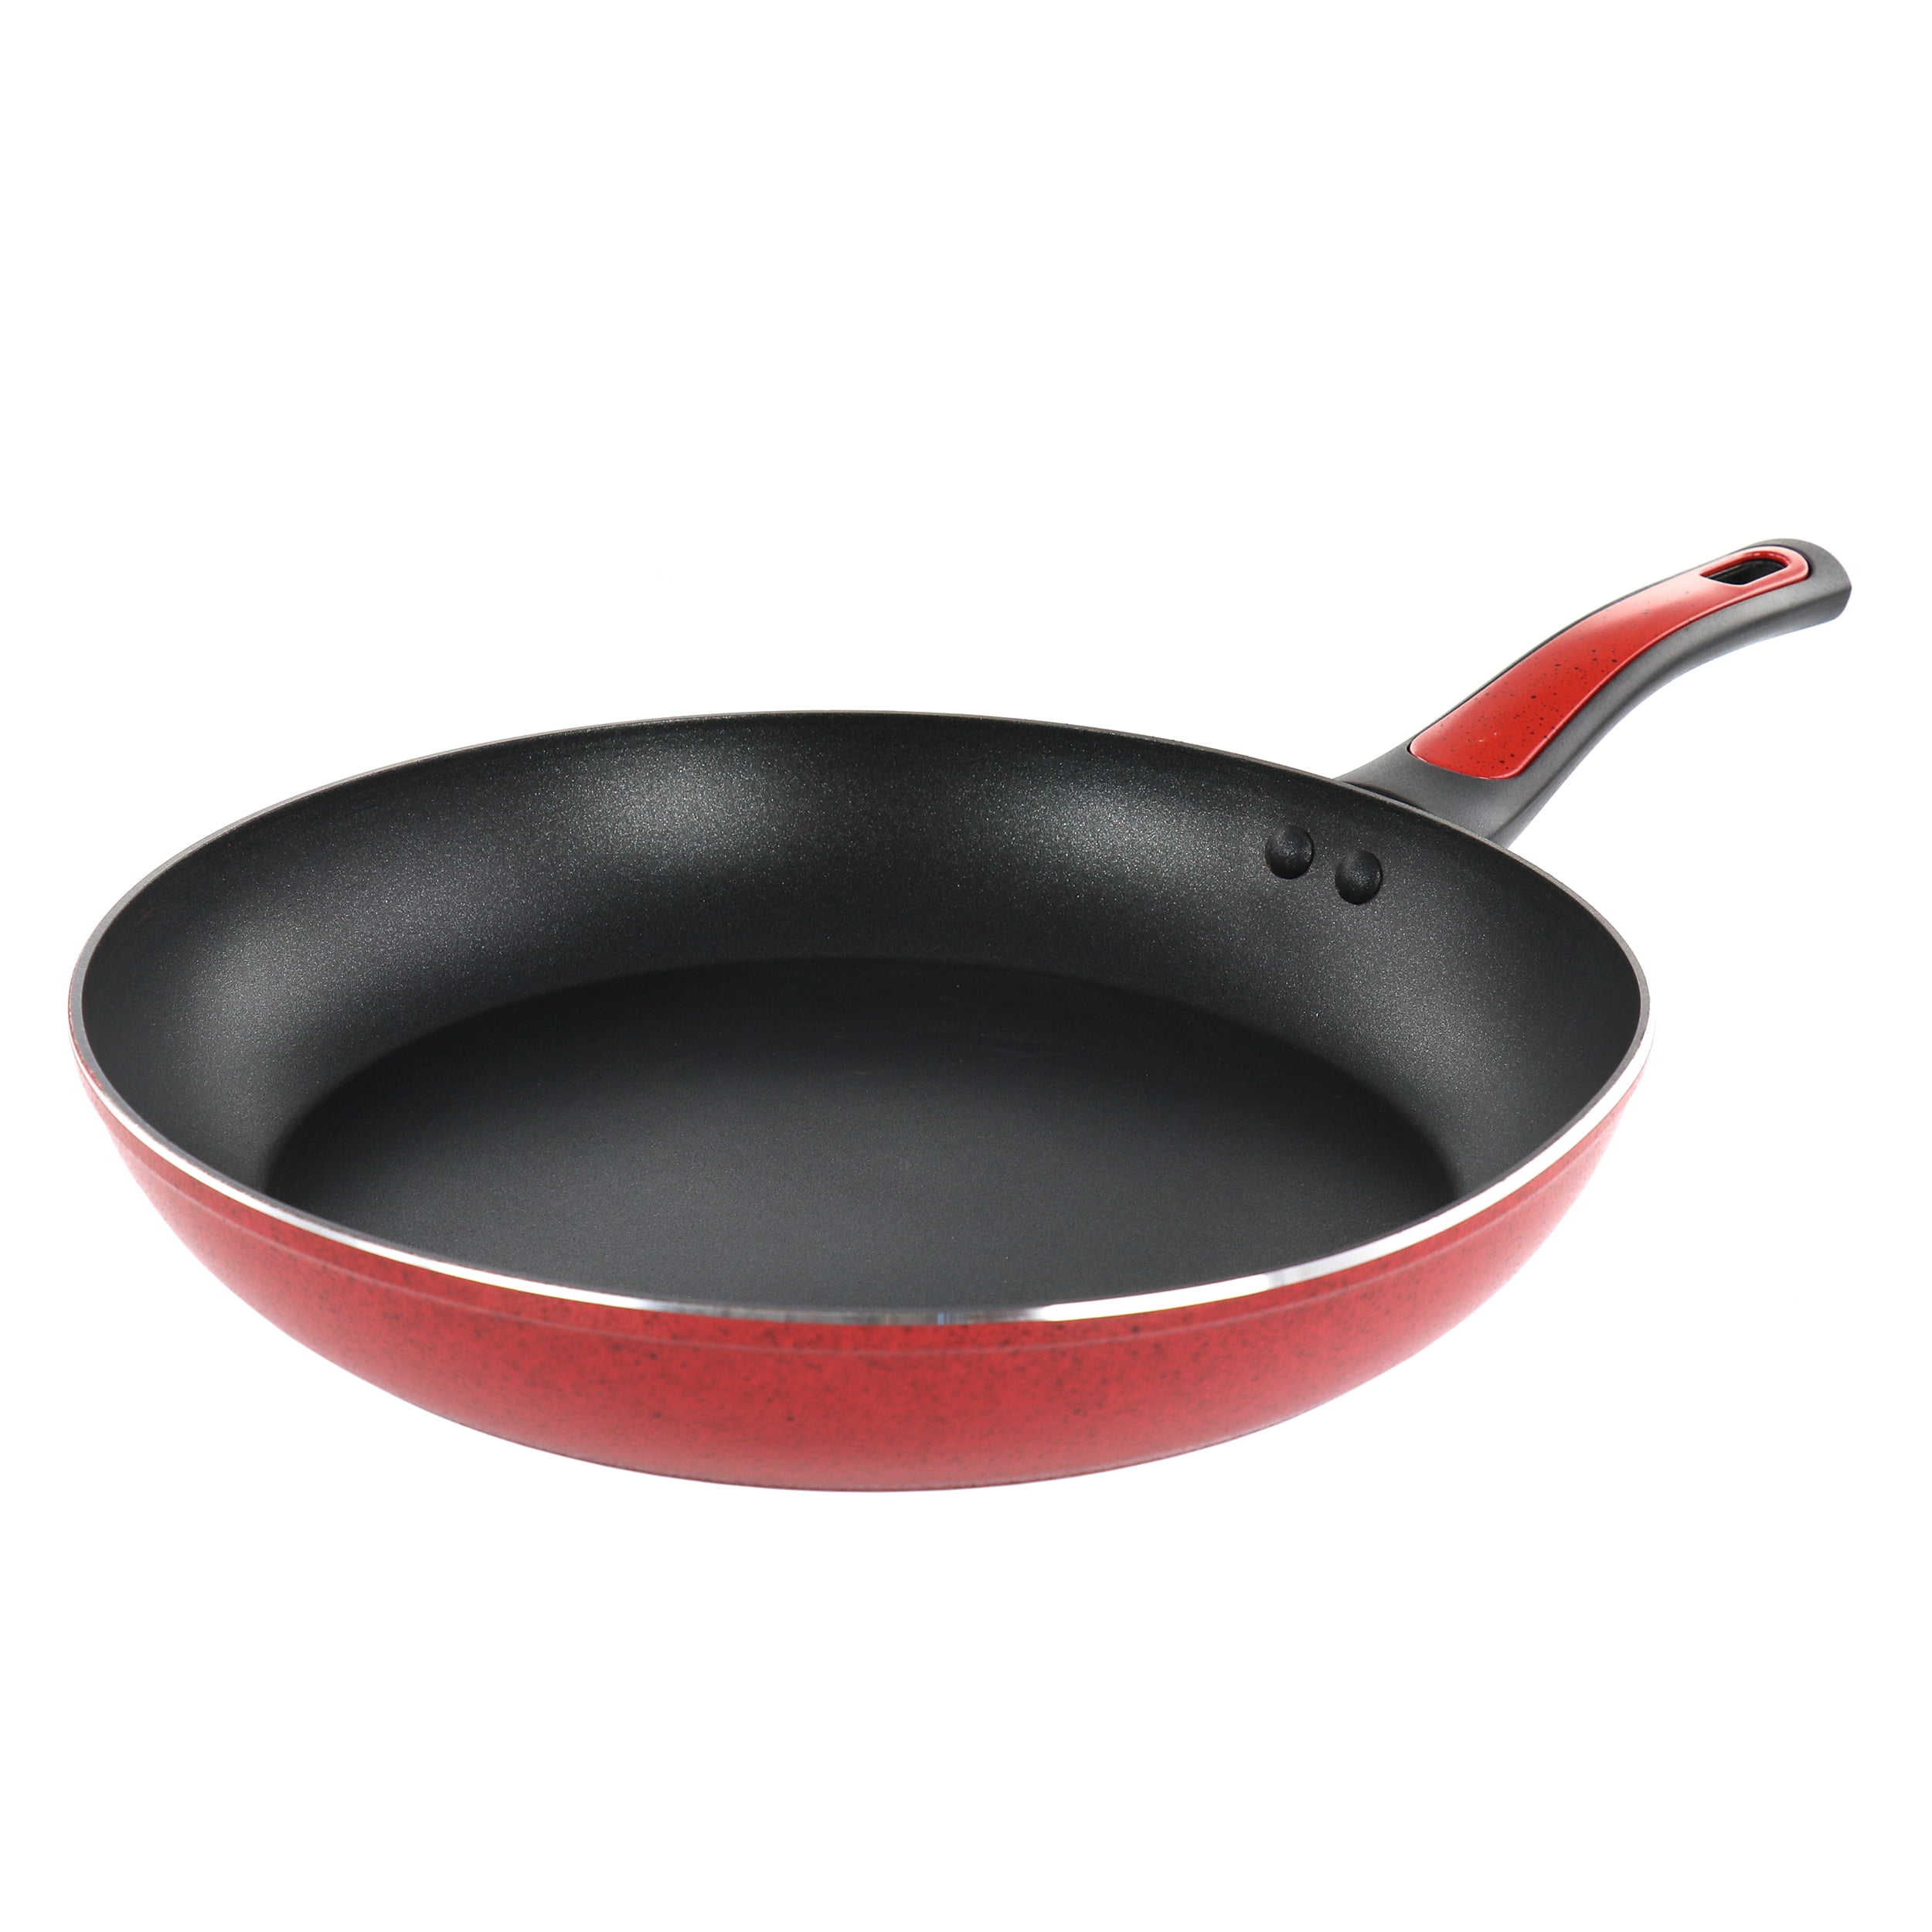 Oster Claybon 12 inch Nonstick Frying Pan in Speckled Red